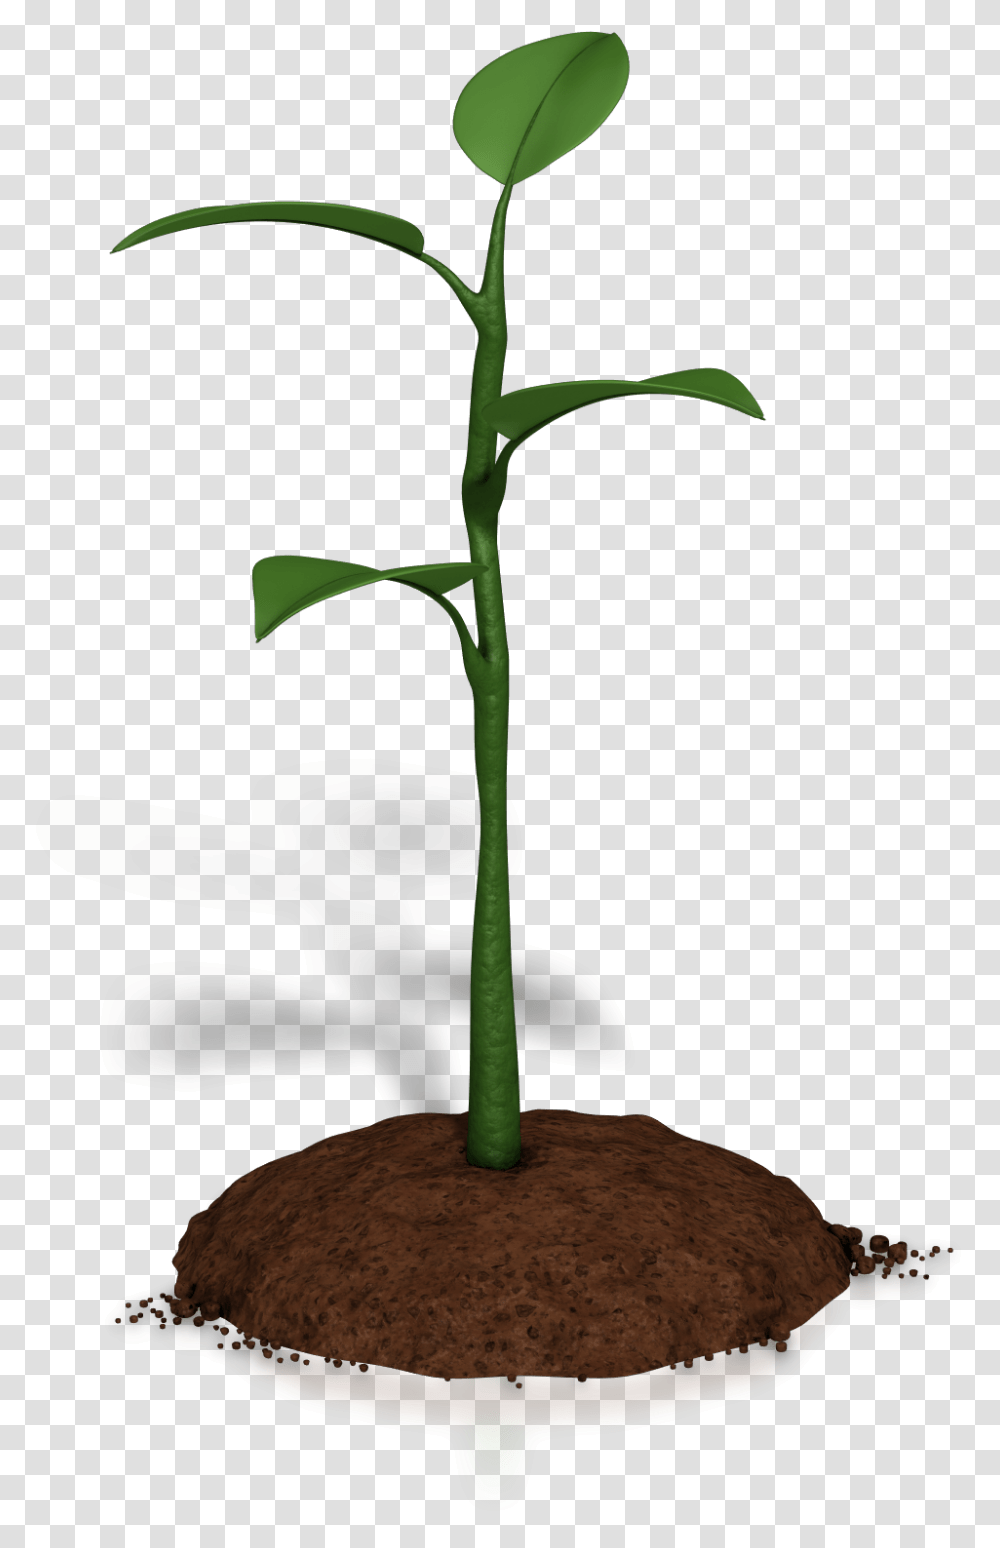 Soil Clipart Plant Growth Plant Animations For Powerpoint Plant Growth Animation, Vegetable, Food, Flower, Blossom Transparent Png